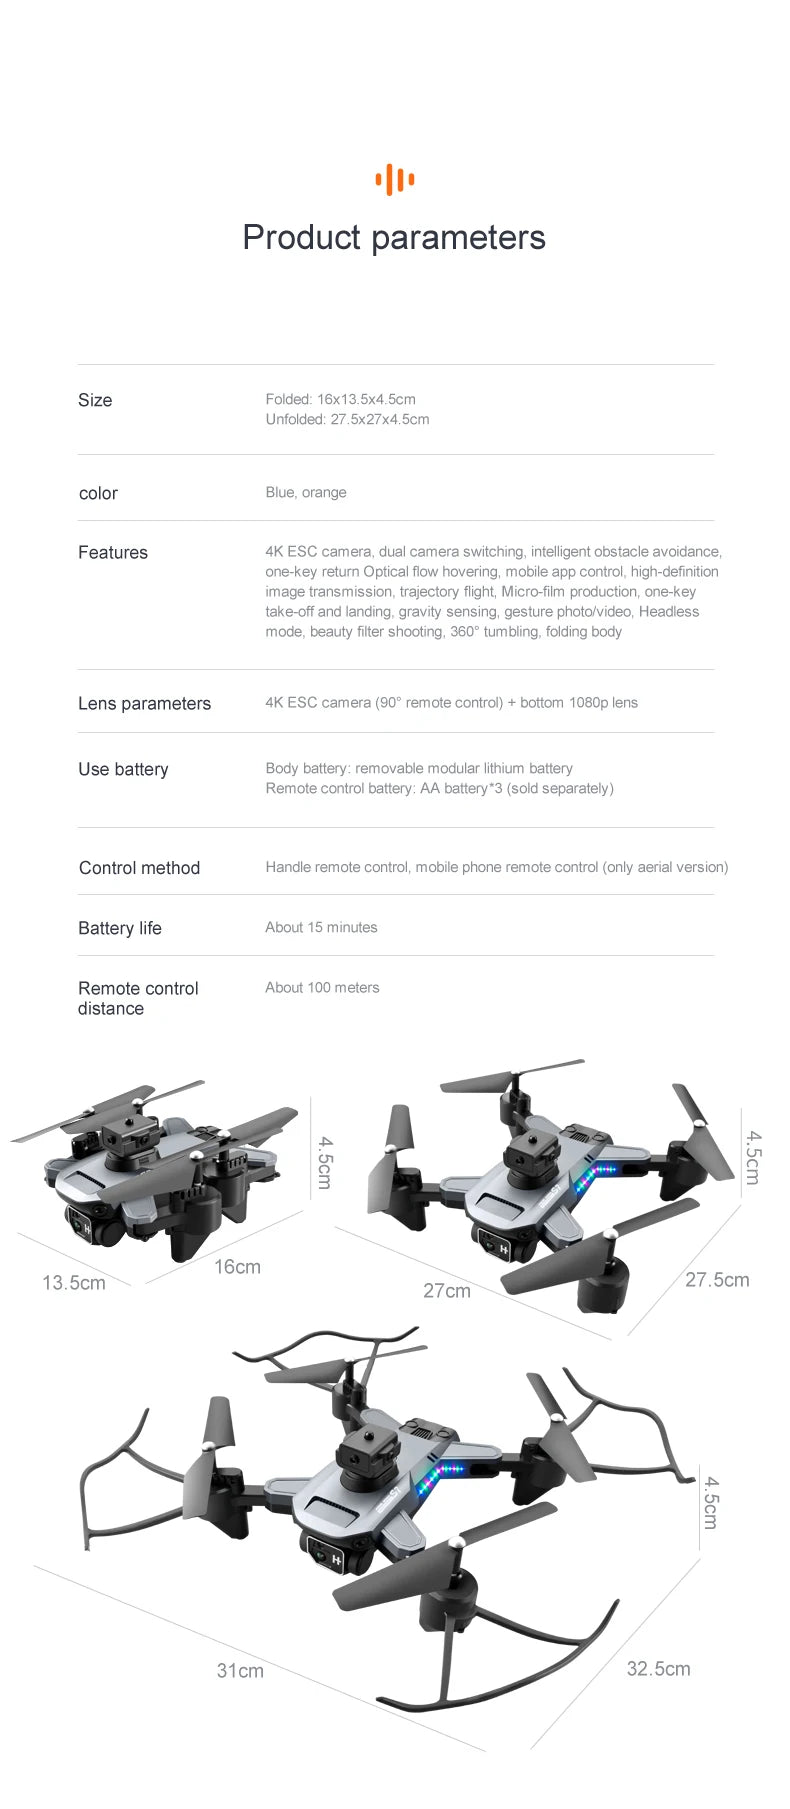 S7 Pro Drone, 4K ESC camera, dual camera switching, intelligent obstacle avoidance, one-key return